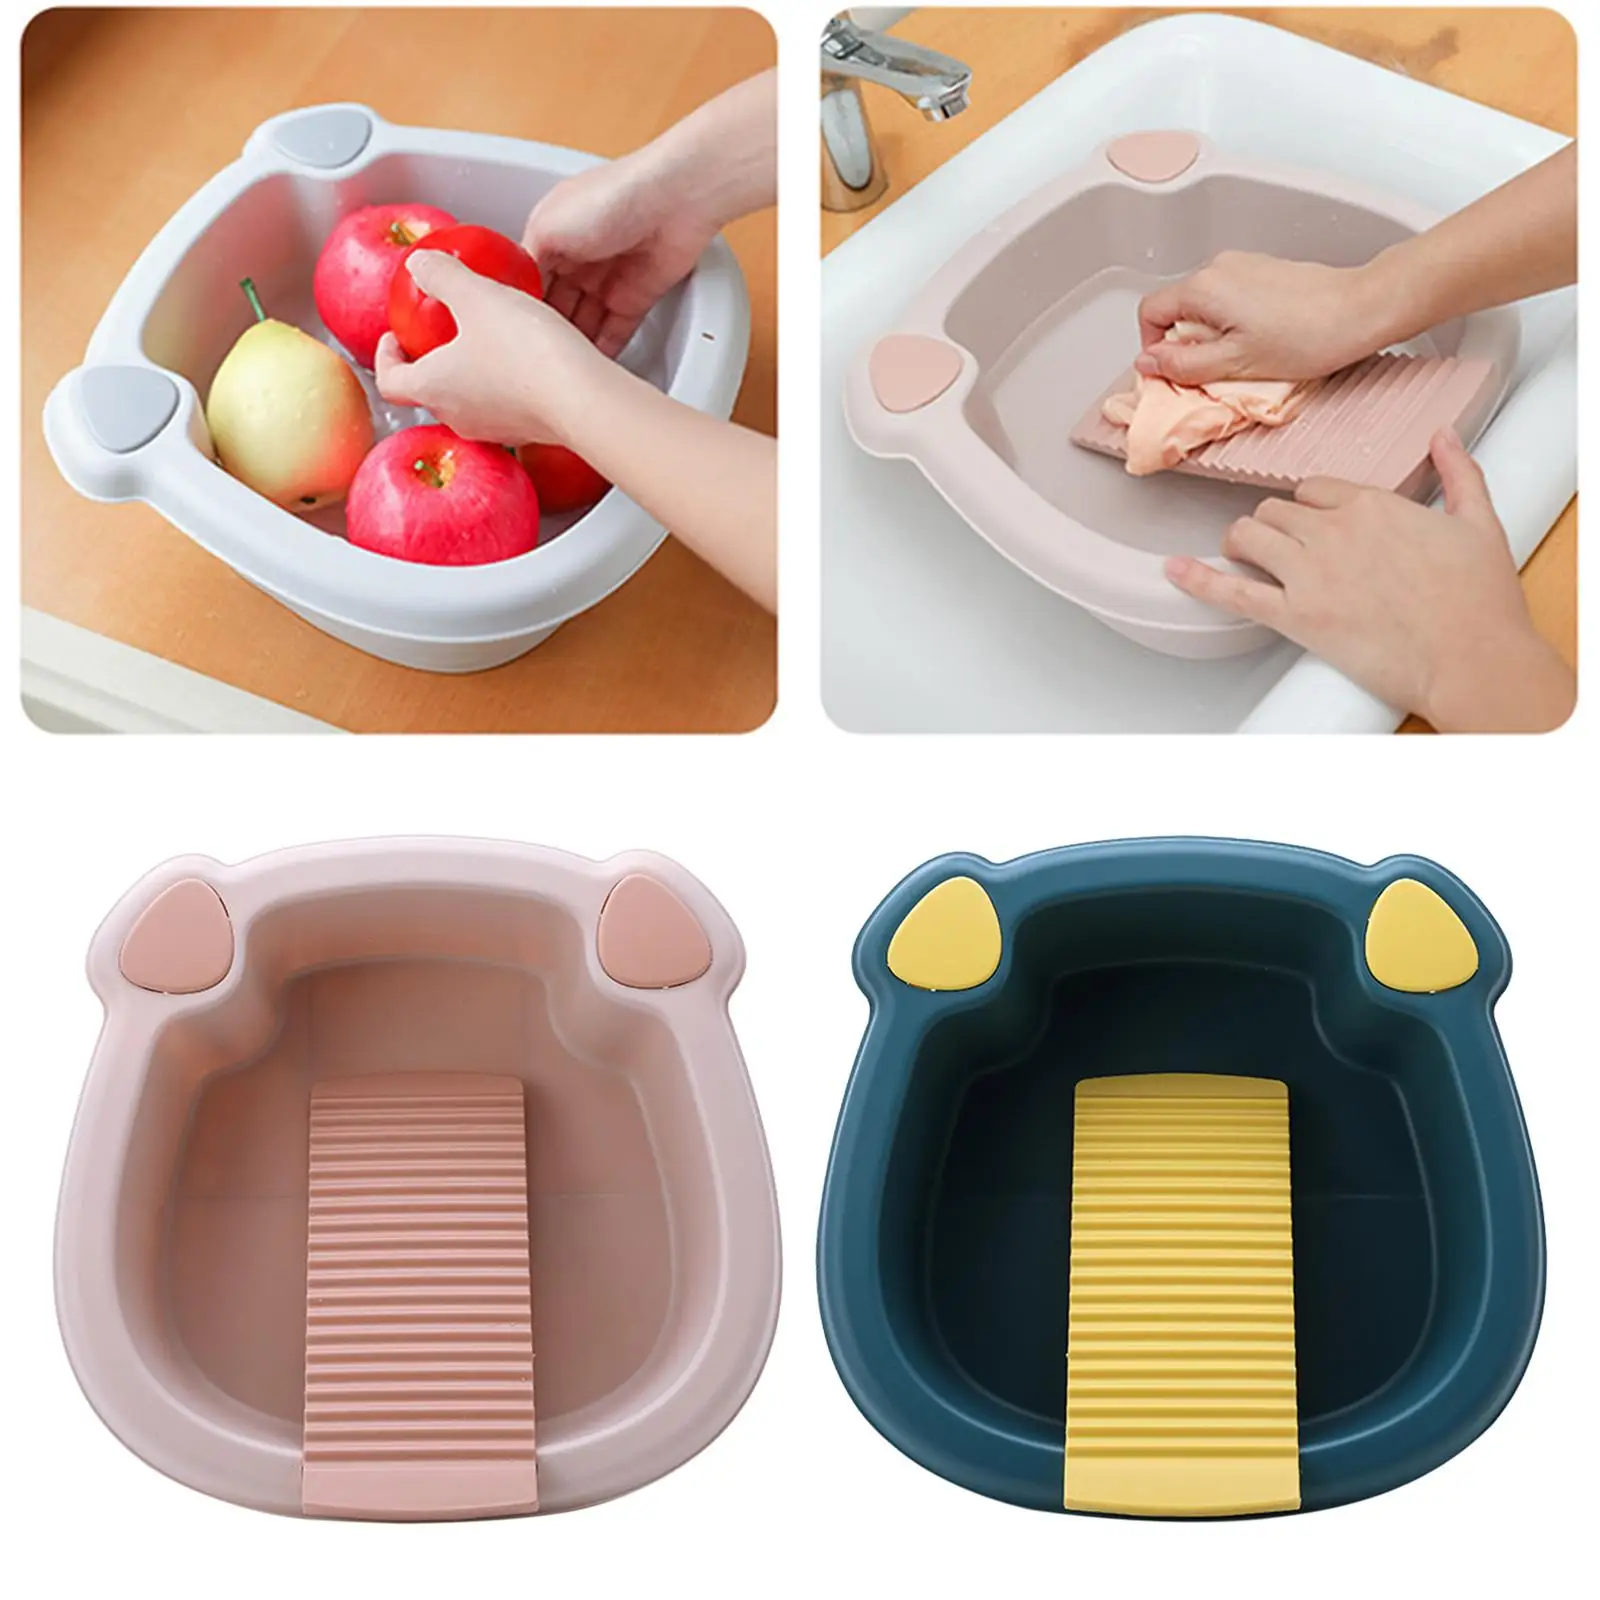 Convenient Washing Clothes Washboard Compact Non Slip Hand Washing Cute Lightweight Washtub for Blouses Home Shirts Pants